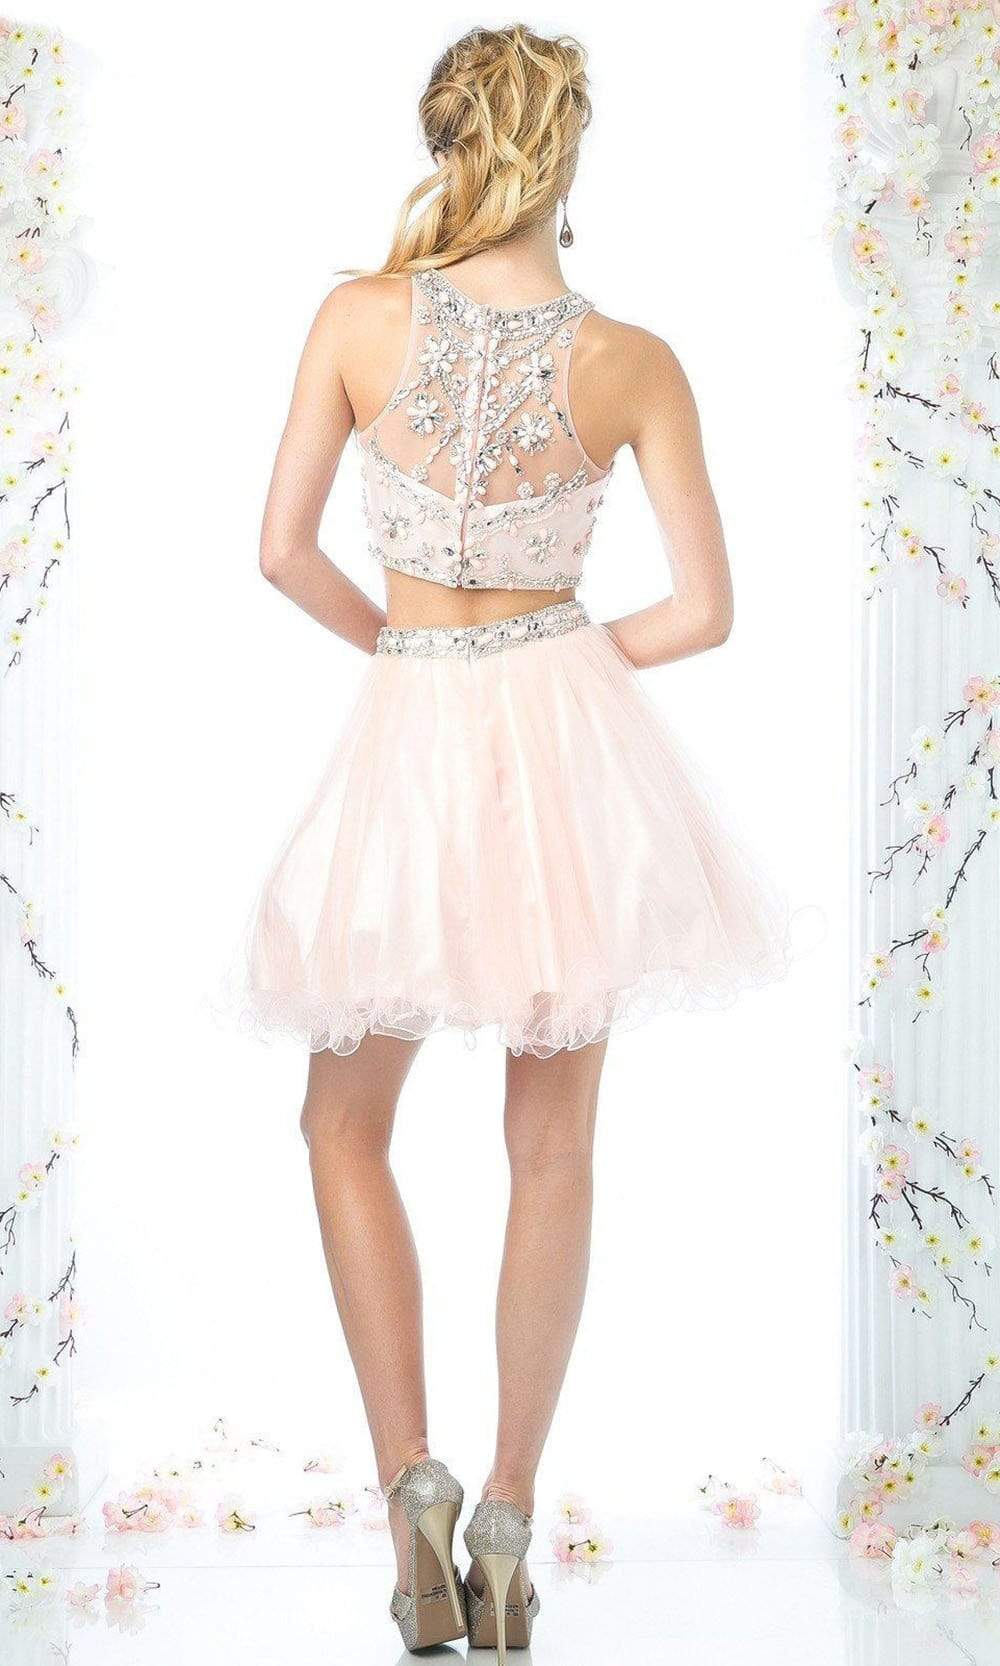 Cinderella Divine - Two-Piece Crystal Ornate Illusion A-Line Dress Special Occasion Dress